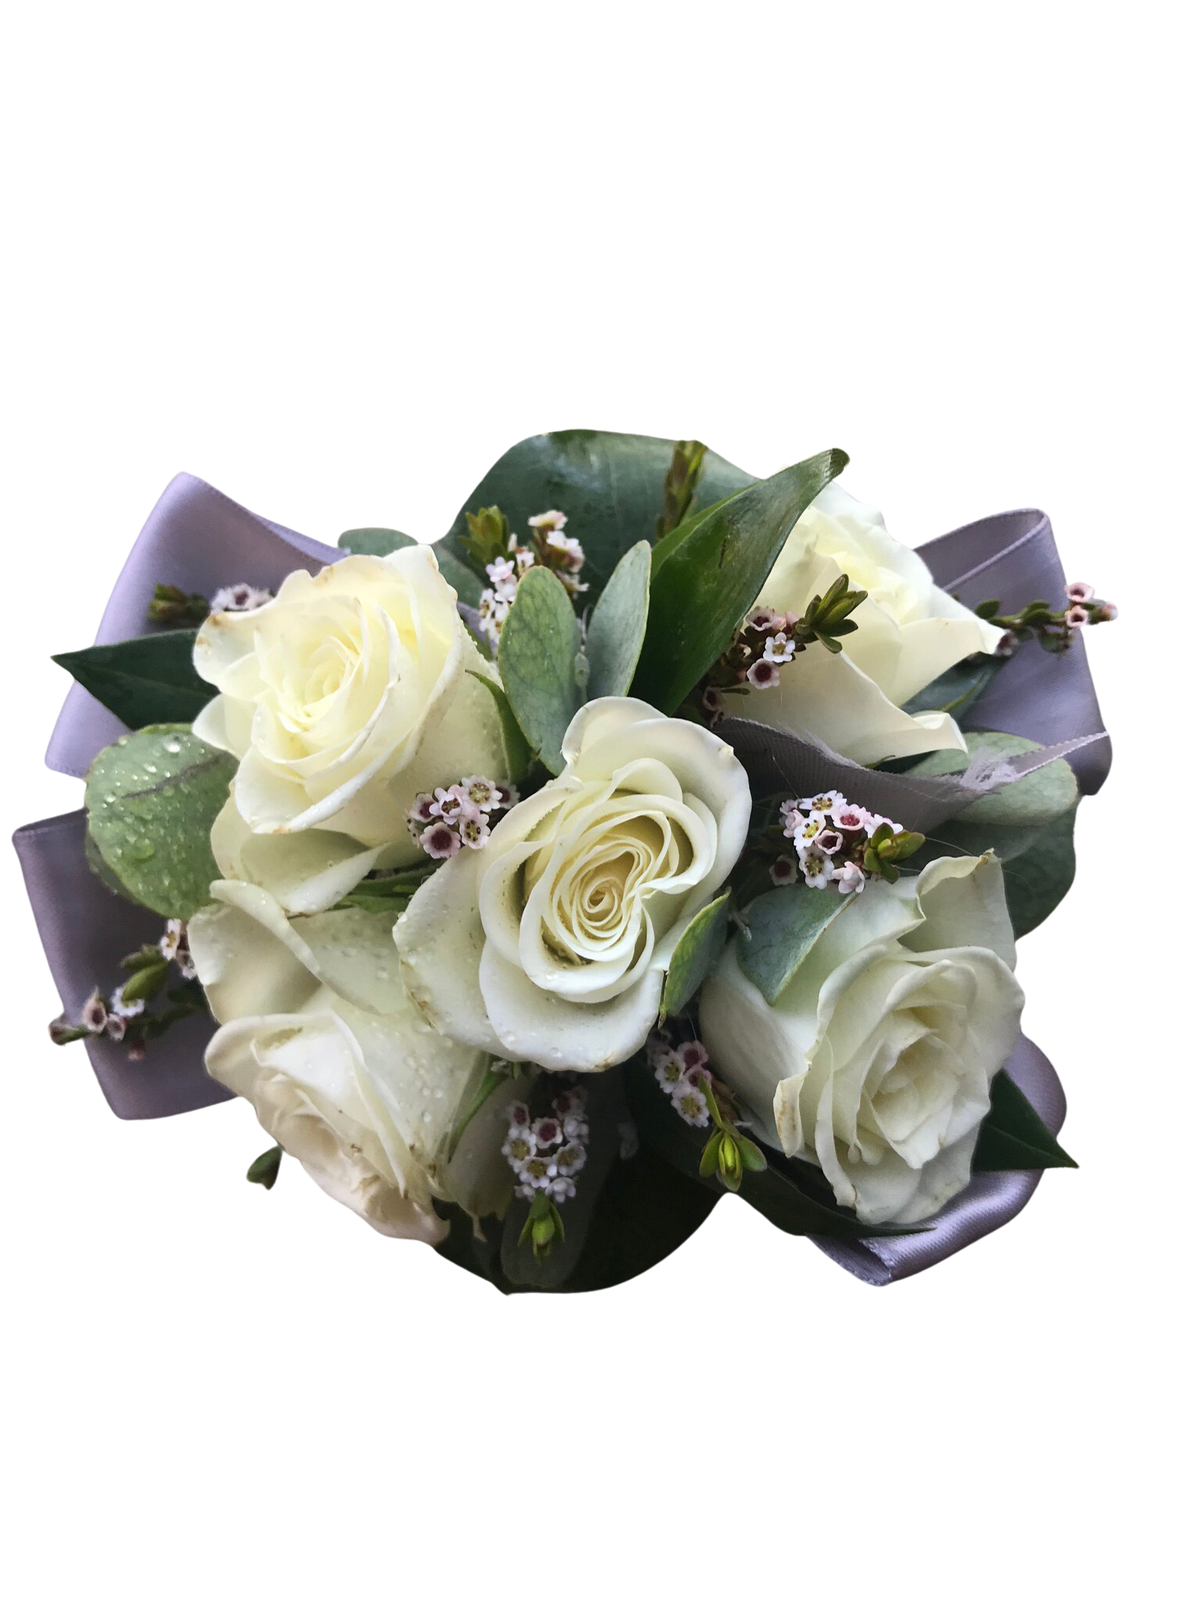 White and Gray Rose Wrist Corsage - White Spray roses, greenery and filler with Grey ribbon on pearl wristband. Greenery and filler may vary based on season and availability.